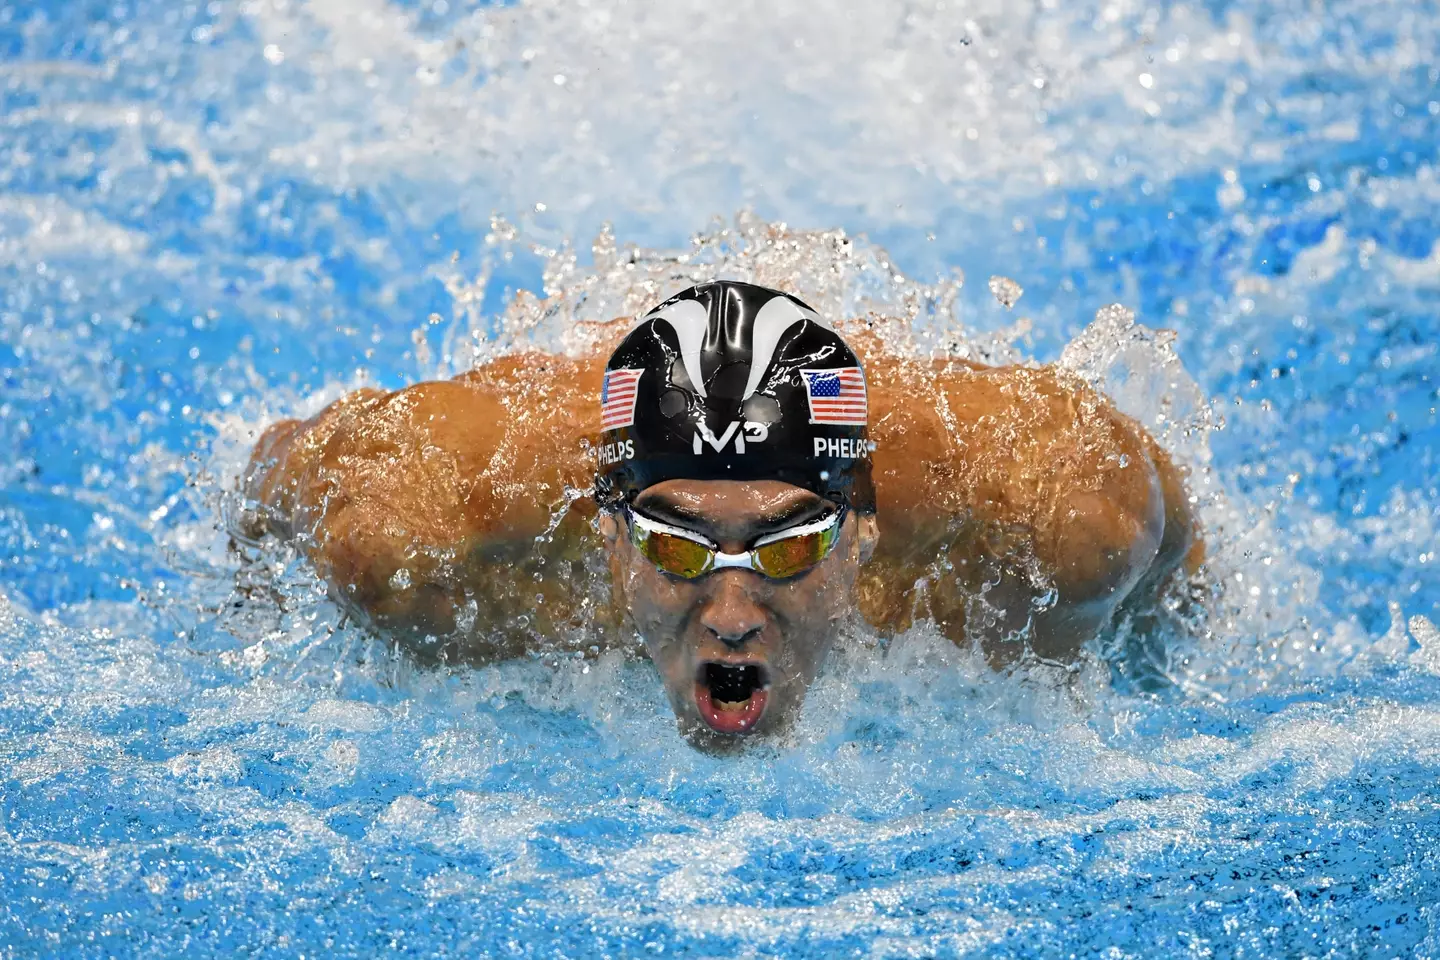 Phelps has amazing lungs for swimming - and smoking.